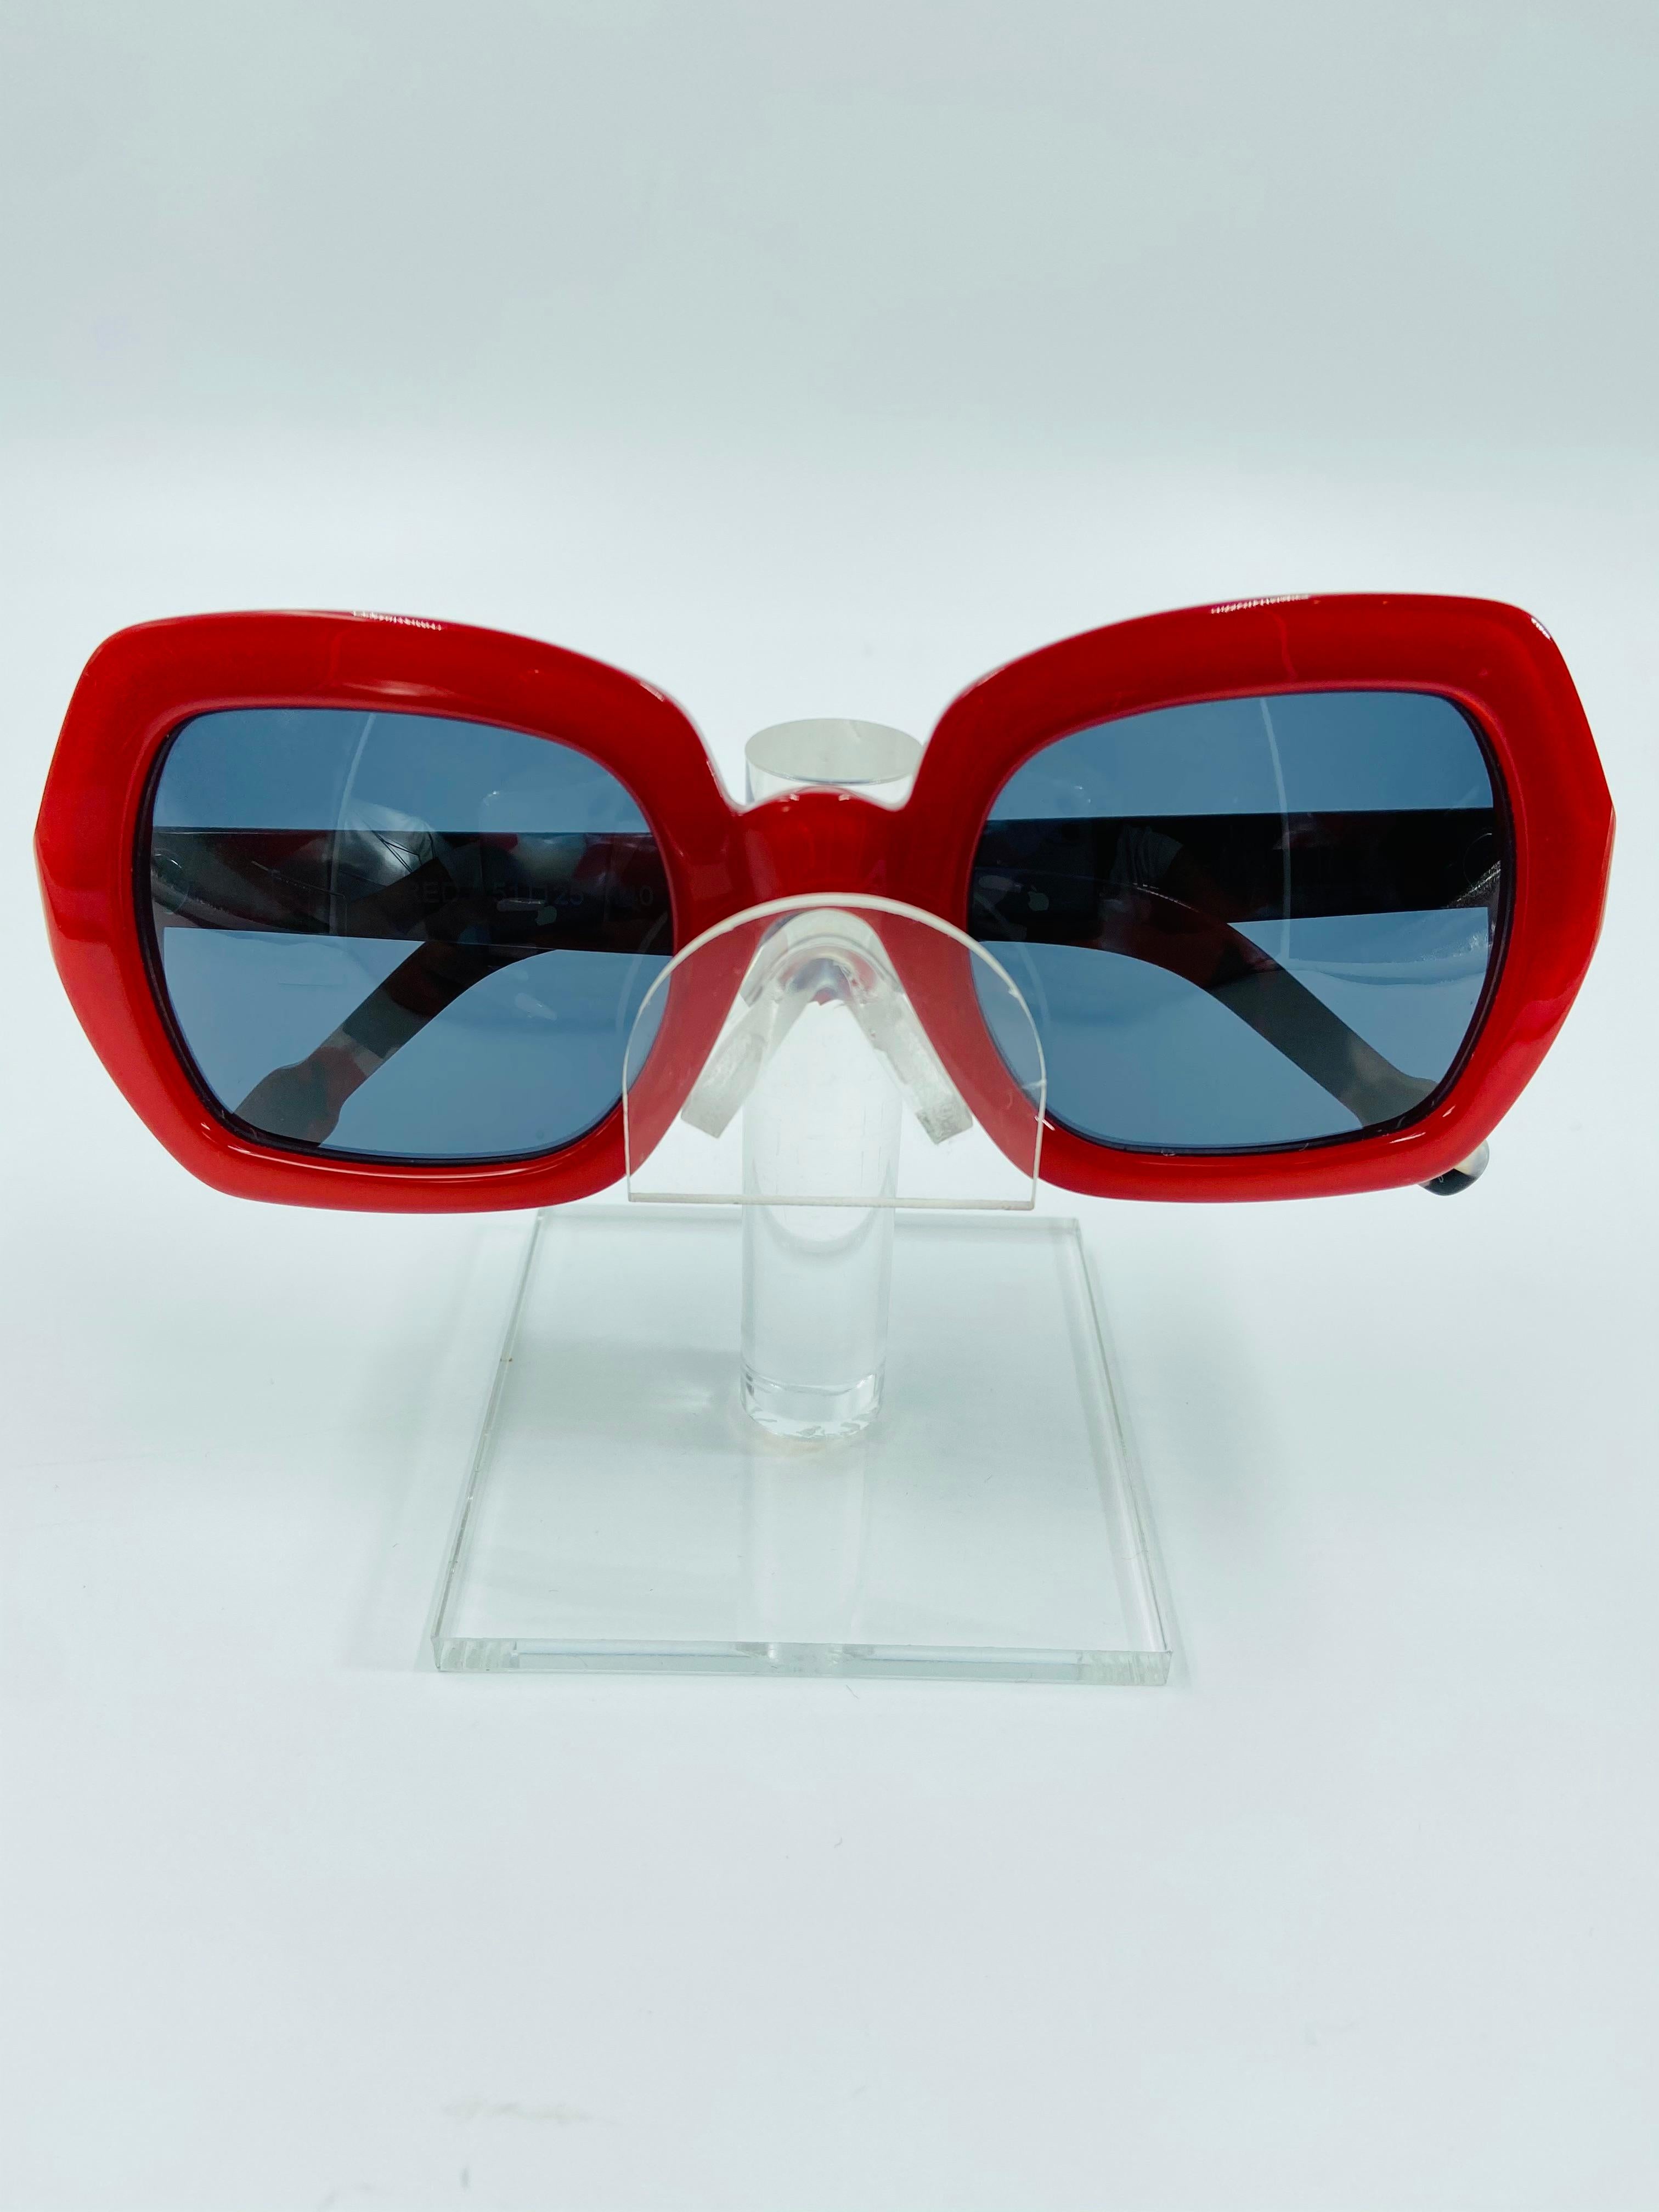 Isson Australia Vintage Ida Red Dead Stock Frames 
Marbled red, pearl and black arms
Handmade in Australia
Dark gray tinted lenses
Never worn

Max width 6 in
Lenses height 1 3/4 in.
Lenses width 2 in.
Arm length 5 1/2 in.